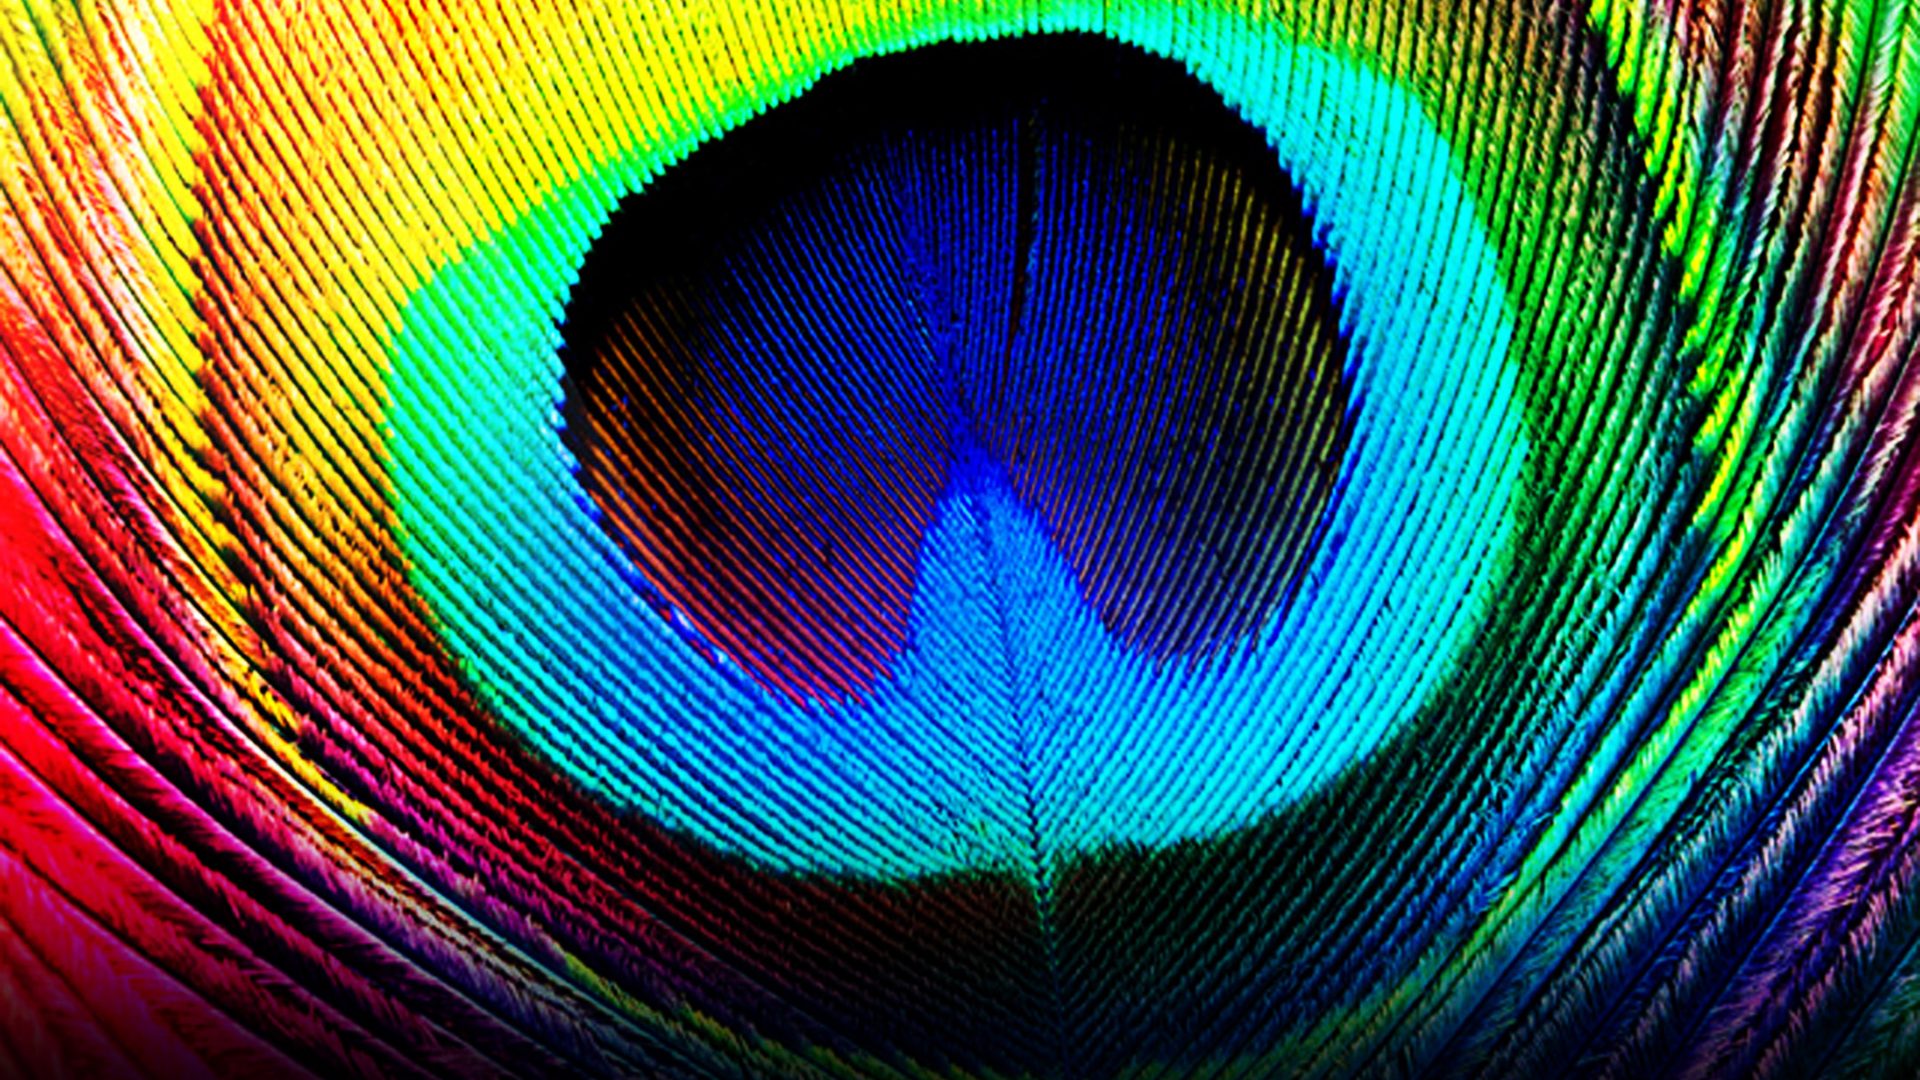 Free download Download Peacock Feathers Backgrounds [1920x1080] for